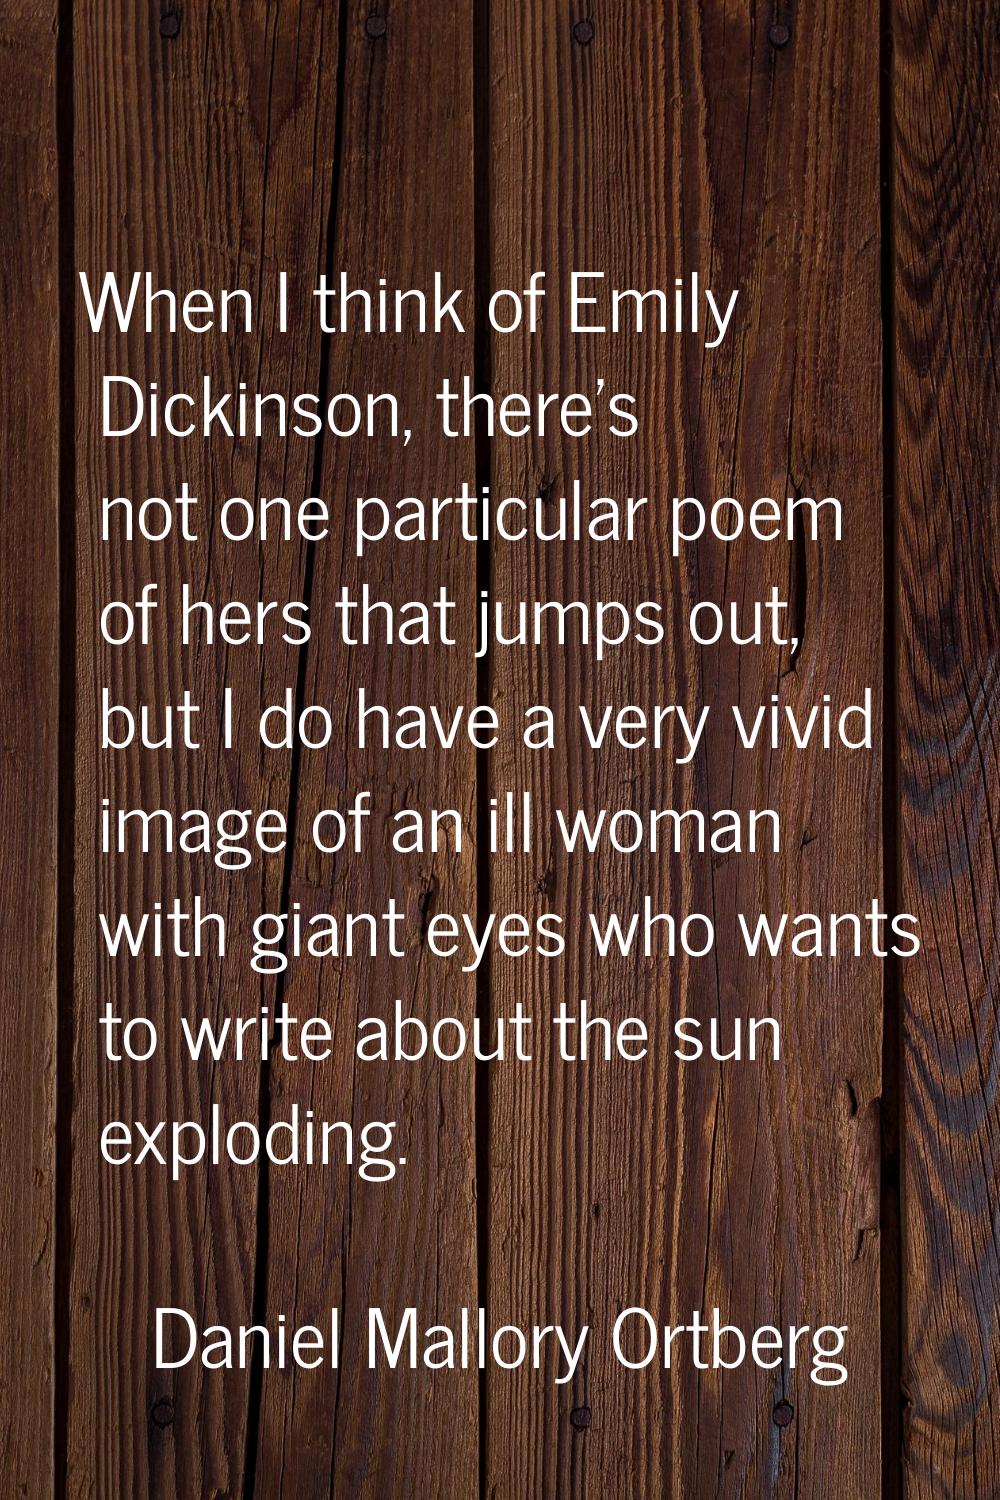 When I think of Emily Dickinson, there's not one particular poem of hers that jumps out, but I do h